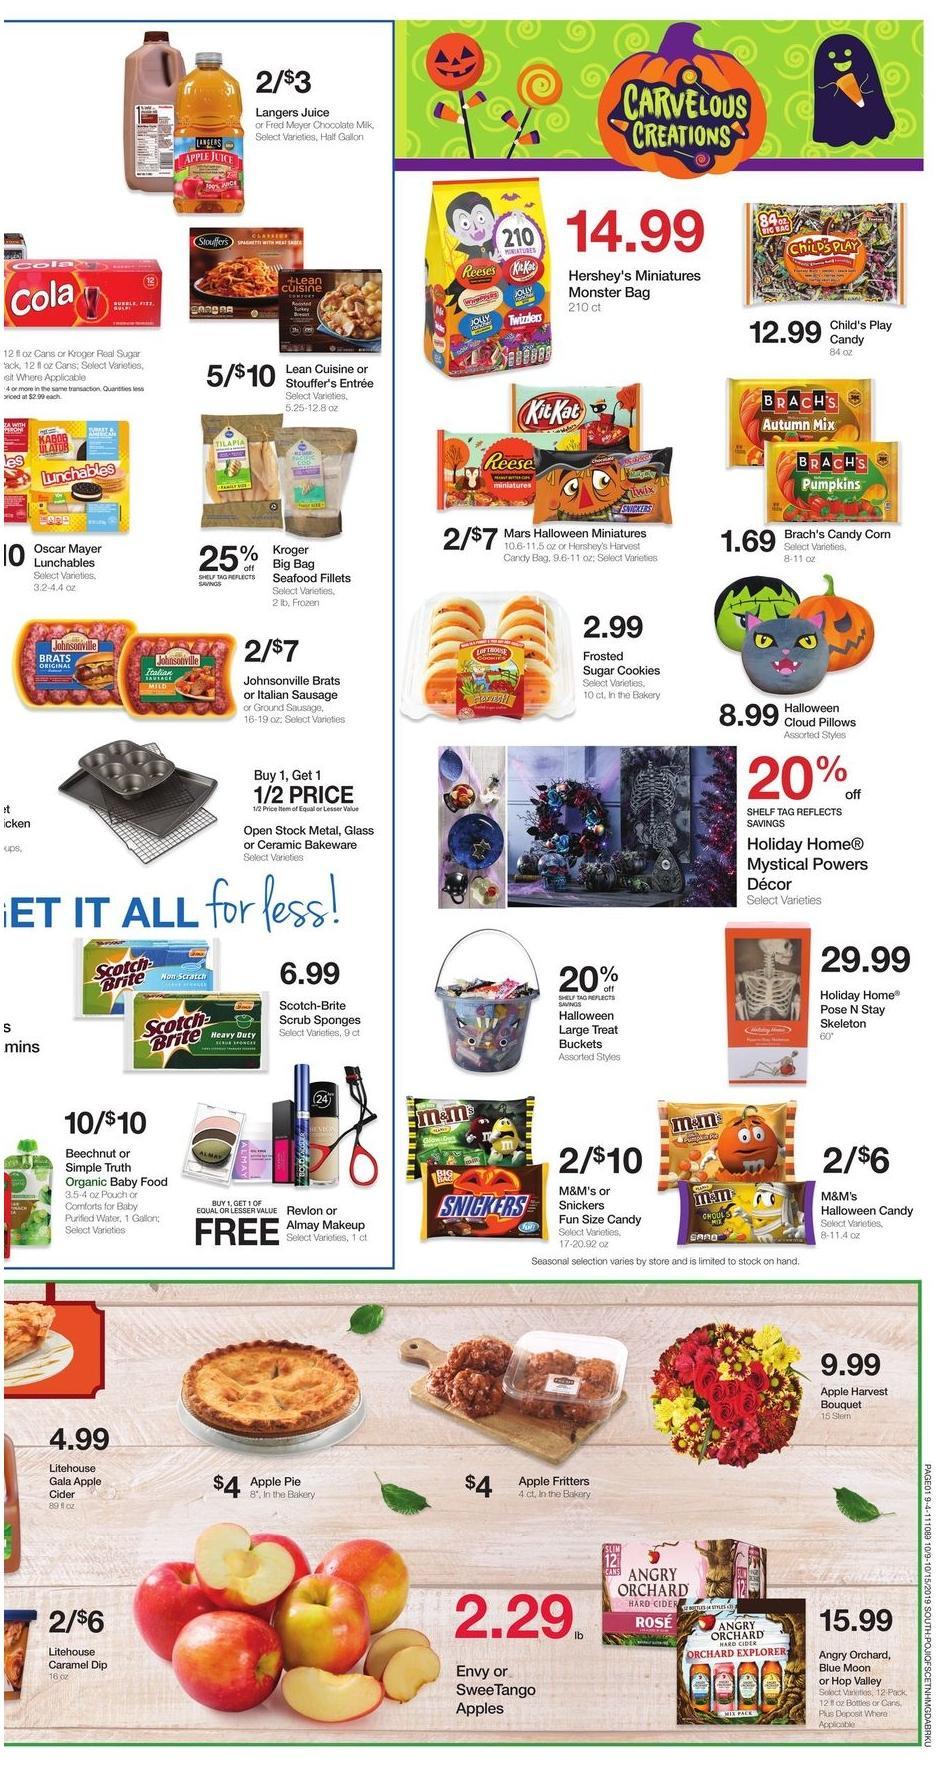 Fred Meyer Weekly Ad from October 9